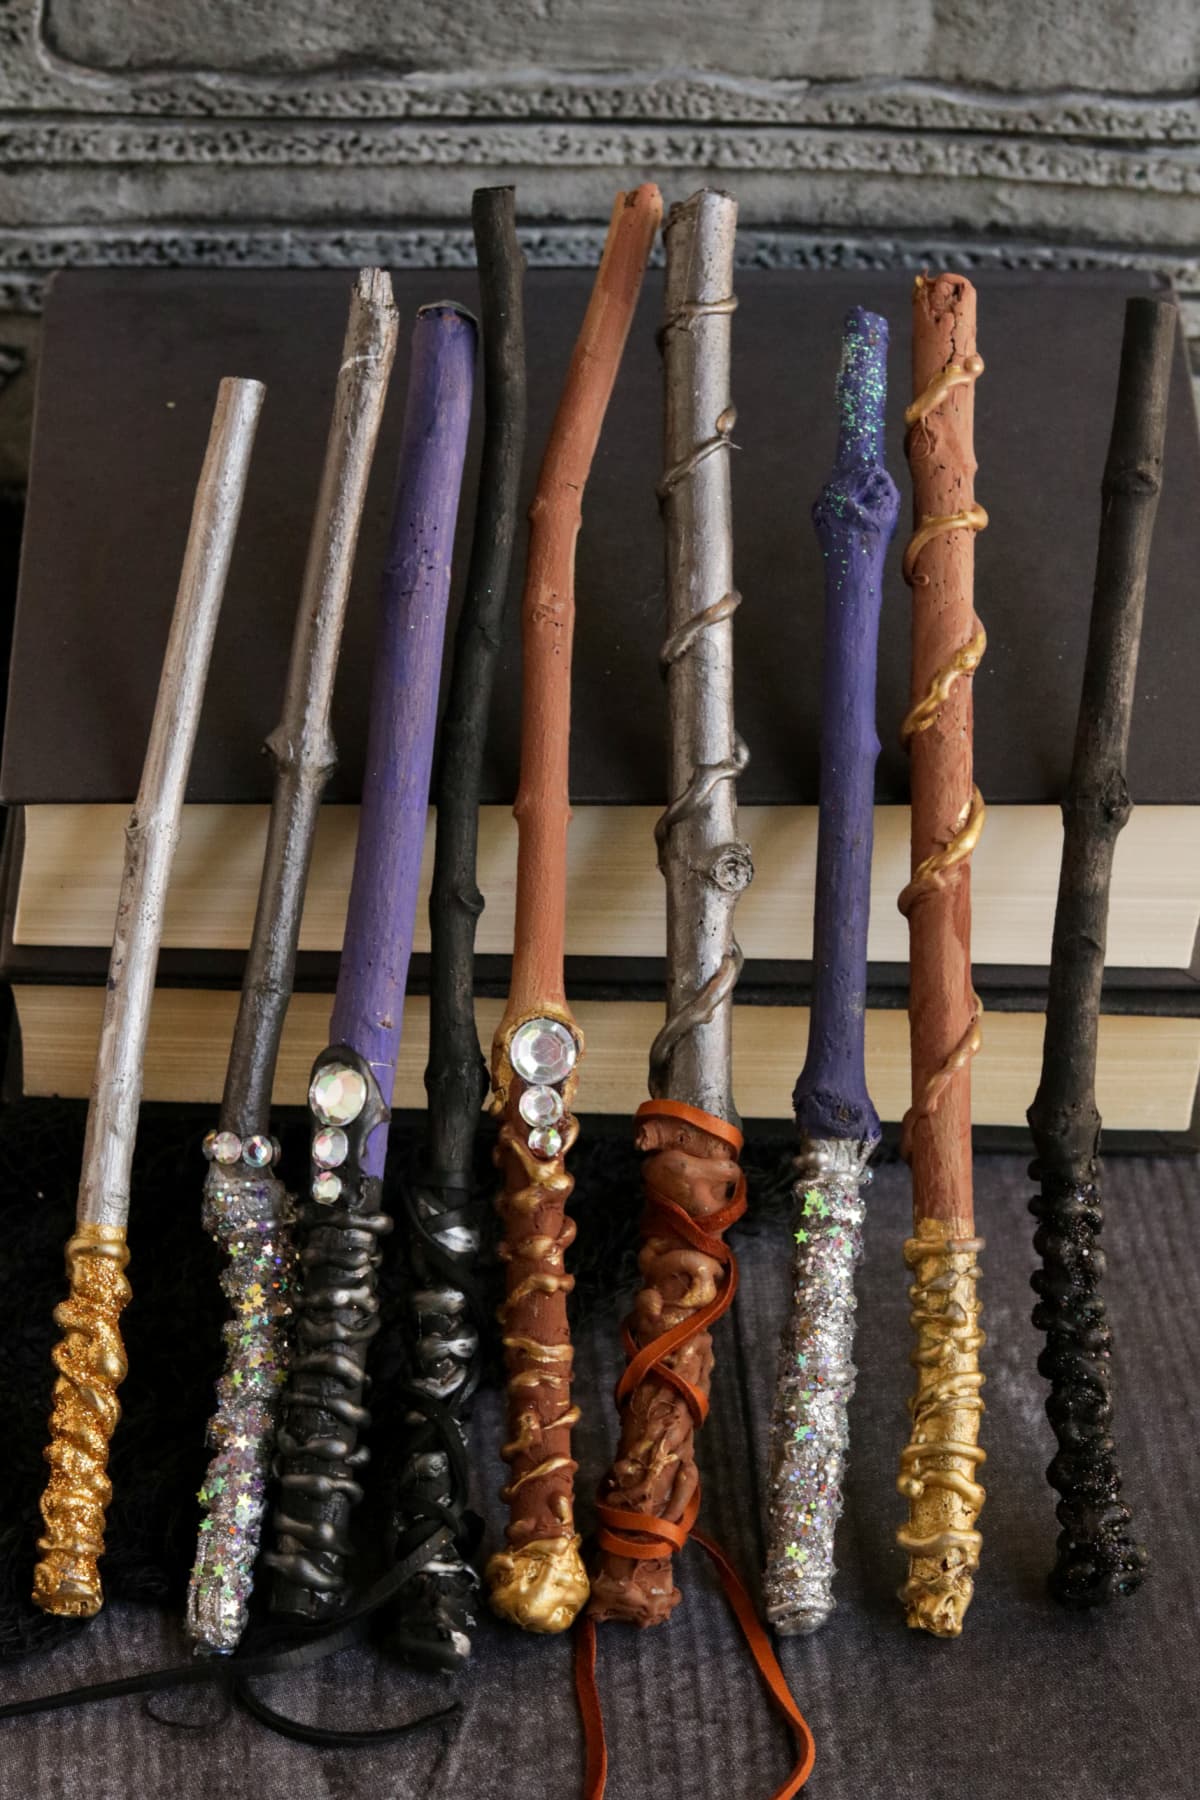 DIY Harry Potter Wands leaning against books